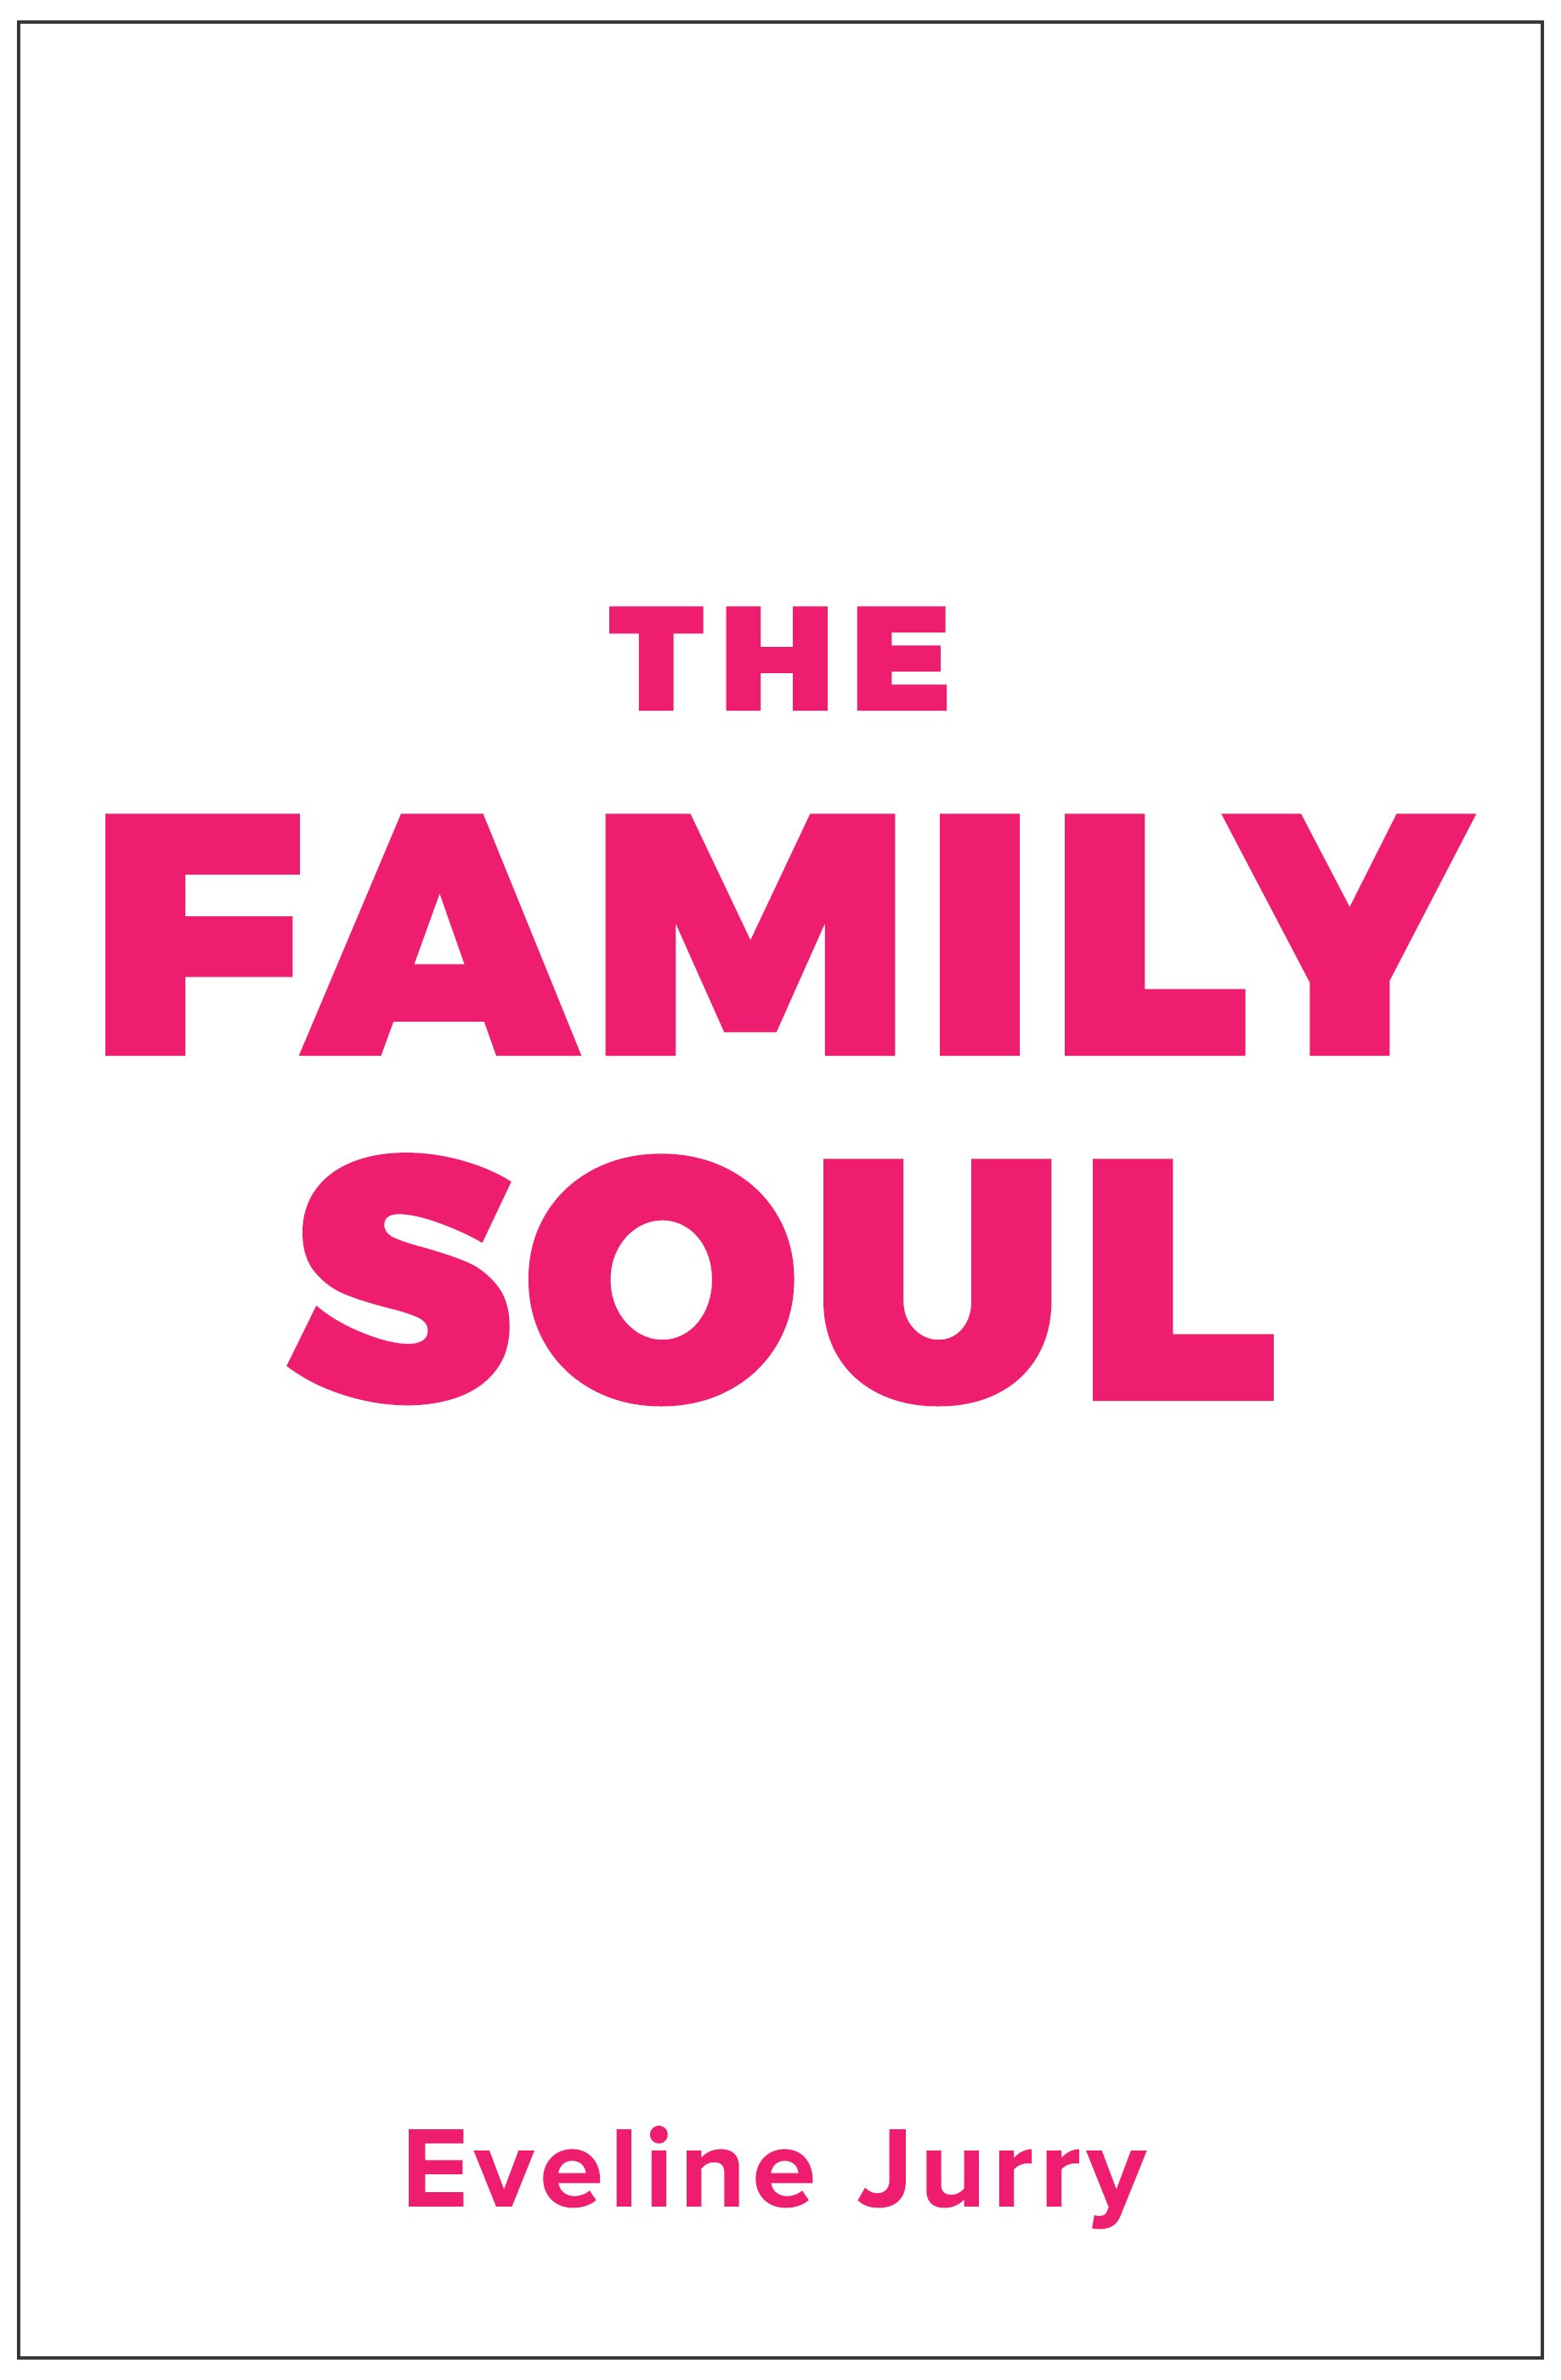 The Family Soul by Eveline Jurry 